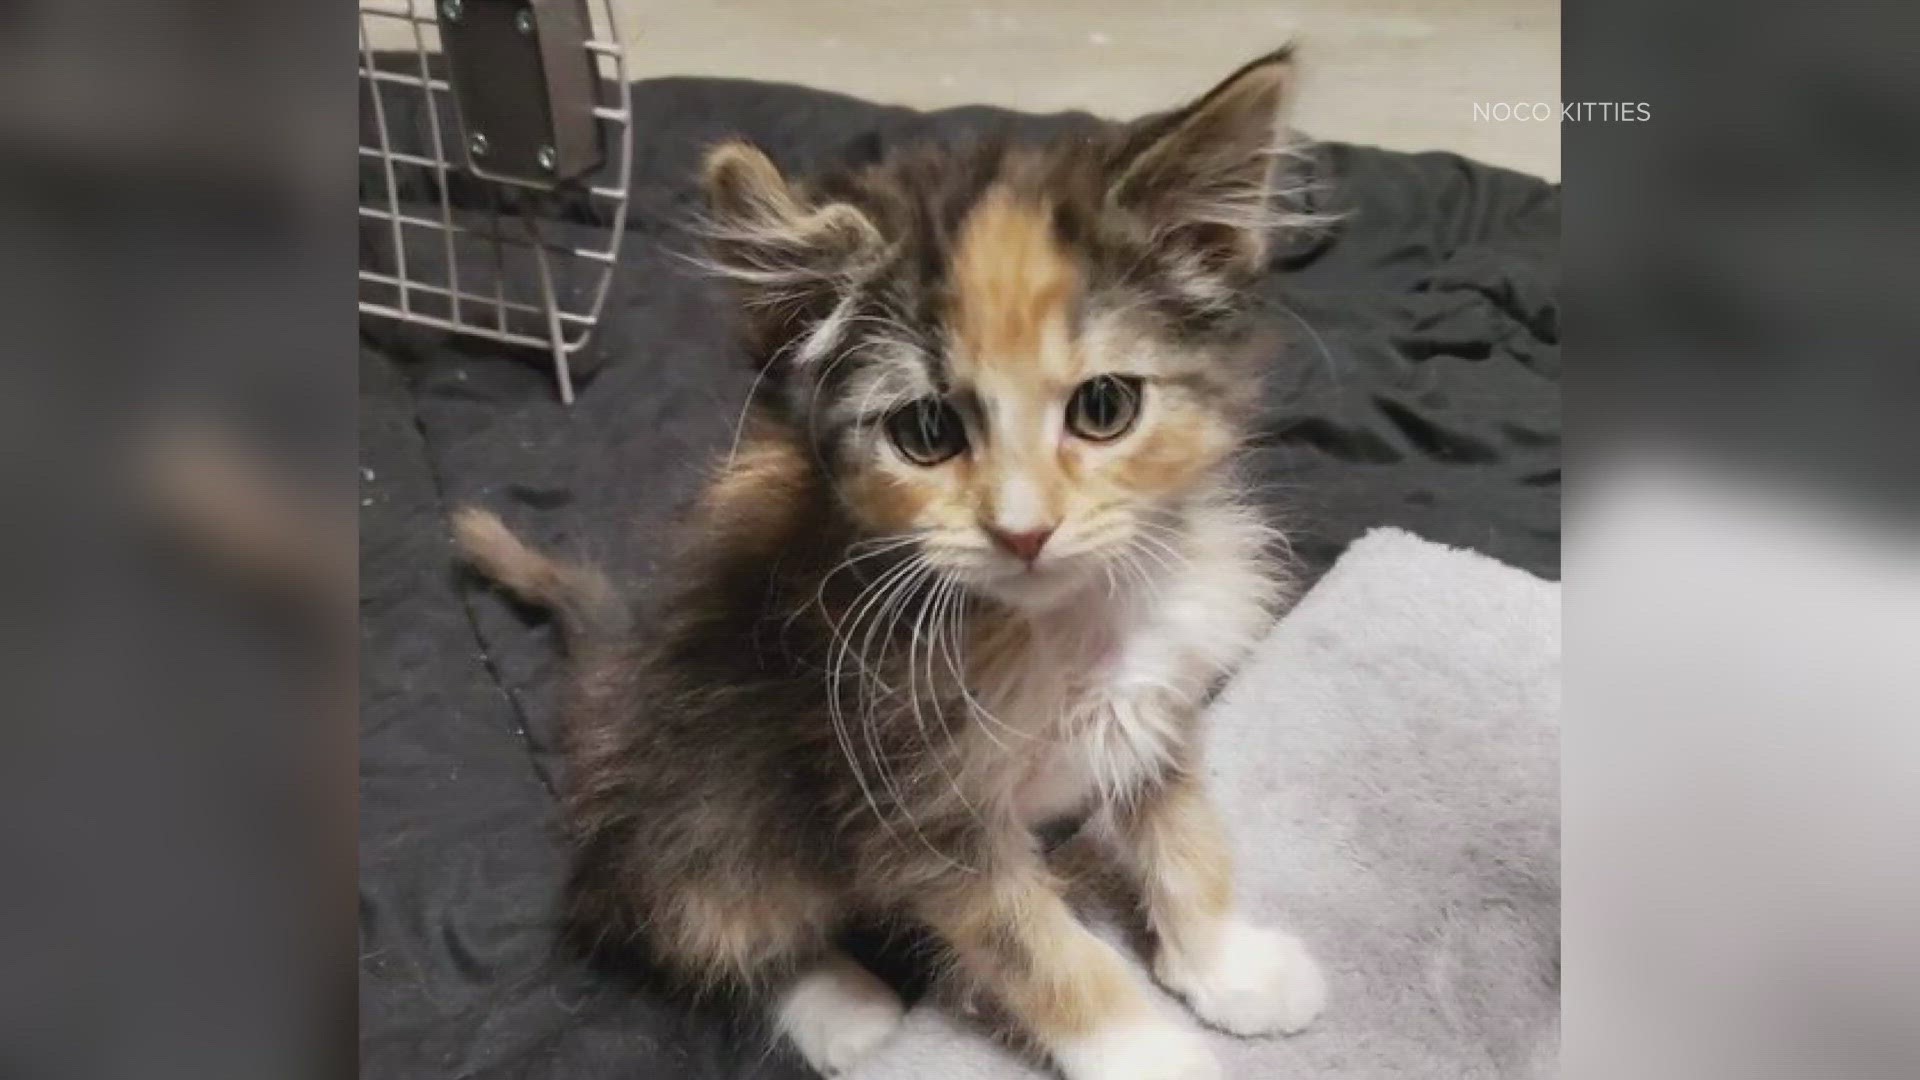 An extremely rare male calico kitten born in a Weld County shed earlier this year was transferred into the care of NoCo Kitties in Loveland.